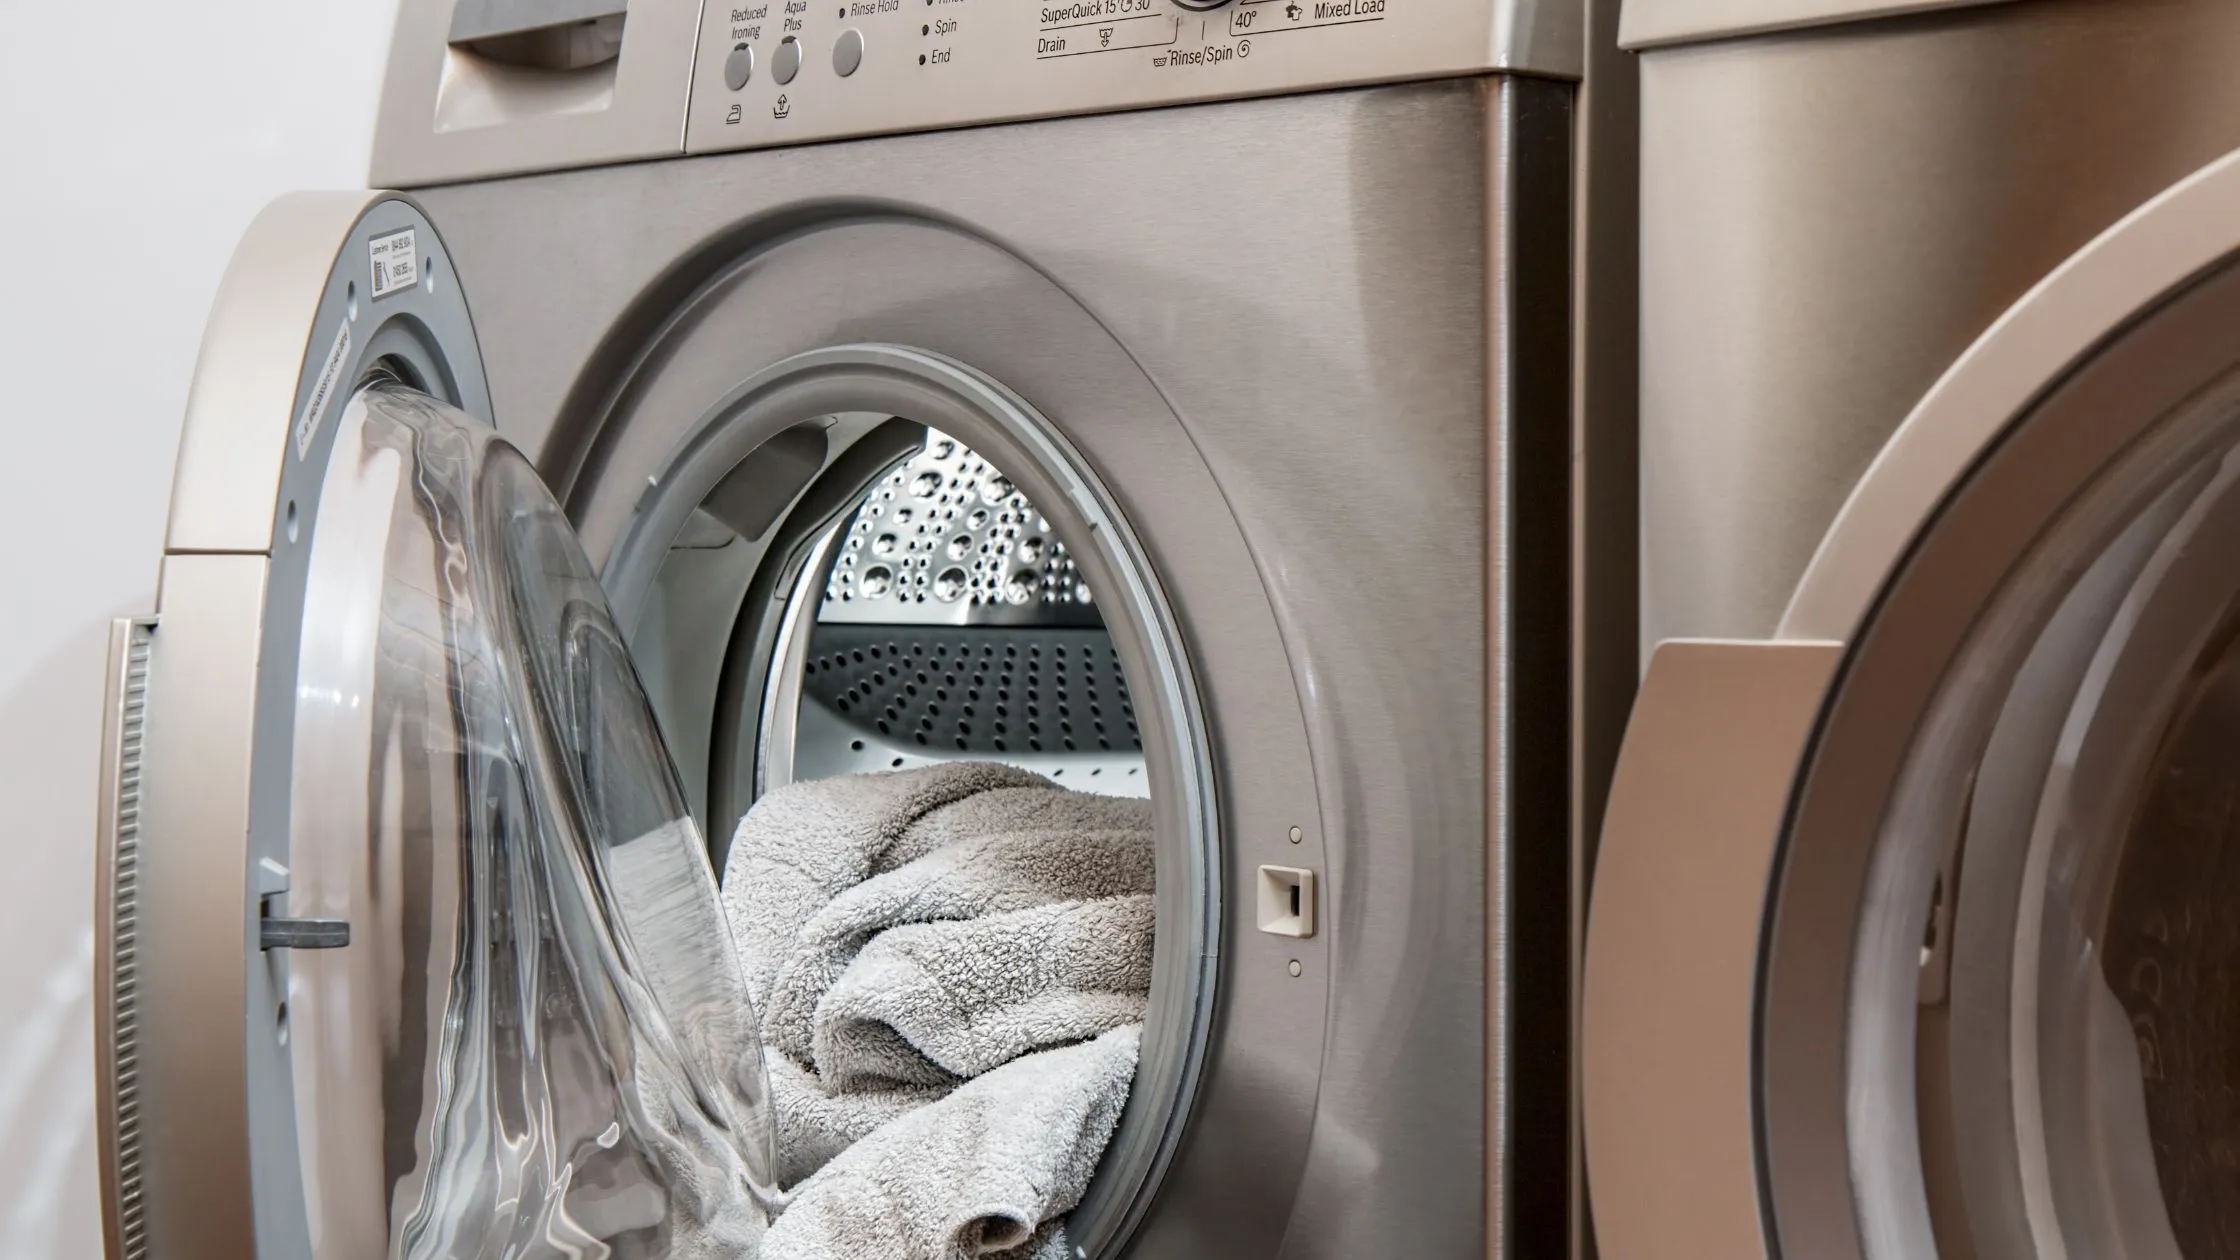 Troubleshooting Common Dryer Issues: A Professional Guide to Dryer Repair